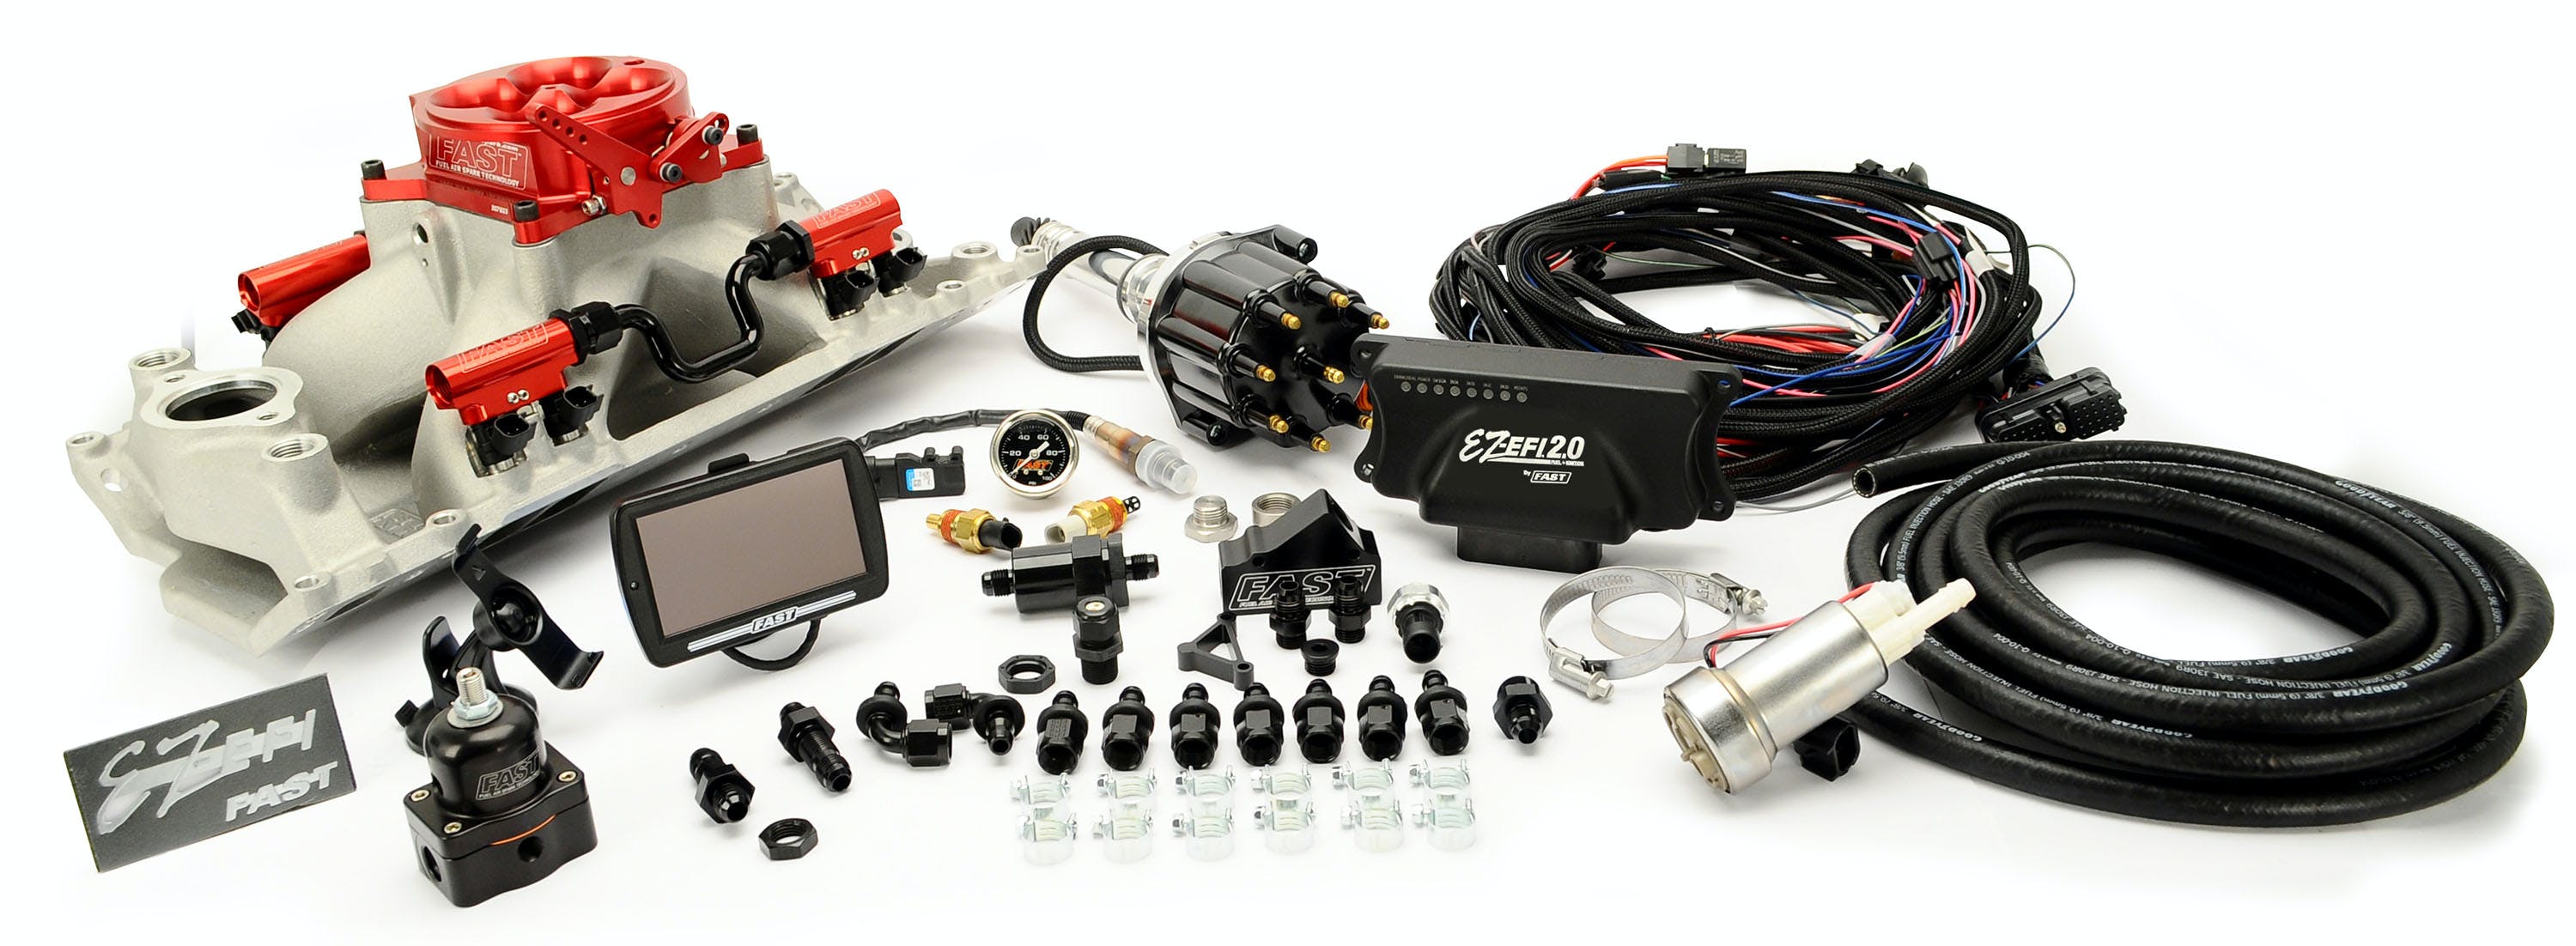 FAST - Fuel Air Spark Technology 30431-05T EZ 2.0 SBF Multiport  w/intake, rails, throttle body, distributor and fuel pump